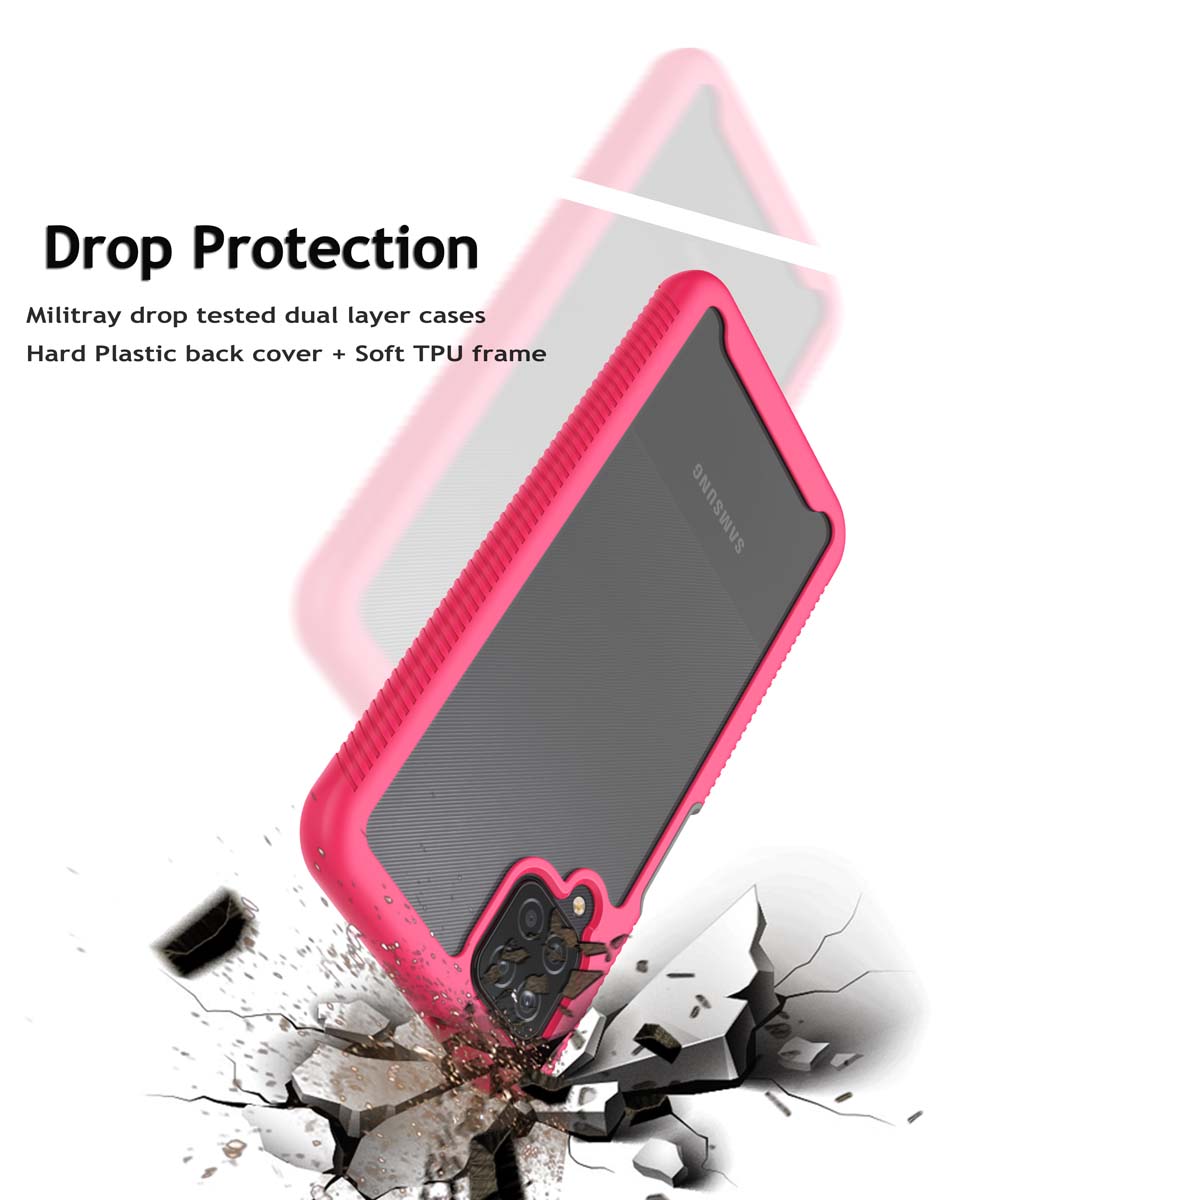 Galaxy A12 5G Case, Sturdy Case for 2021 Samsung Galaxy A12 5G, Njjex Full-Body Rugged Transparent Clear Back Bumper Case Cover for Samsung Galaxy A12 5G 6.5" 2021 -Hot Pink - image 4 of 10